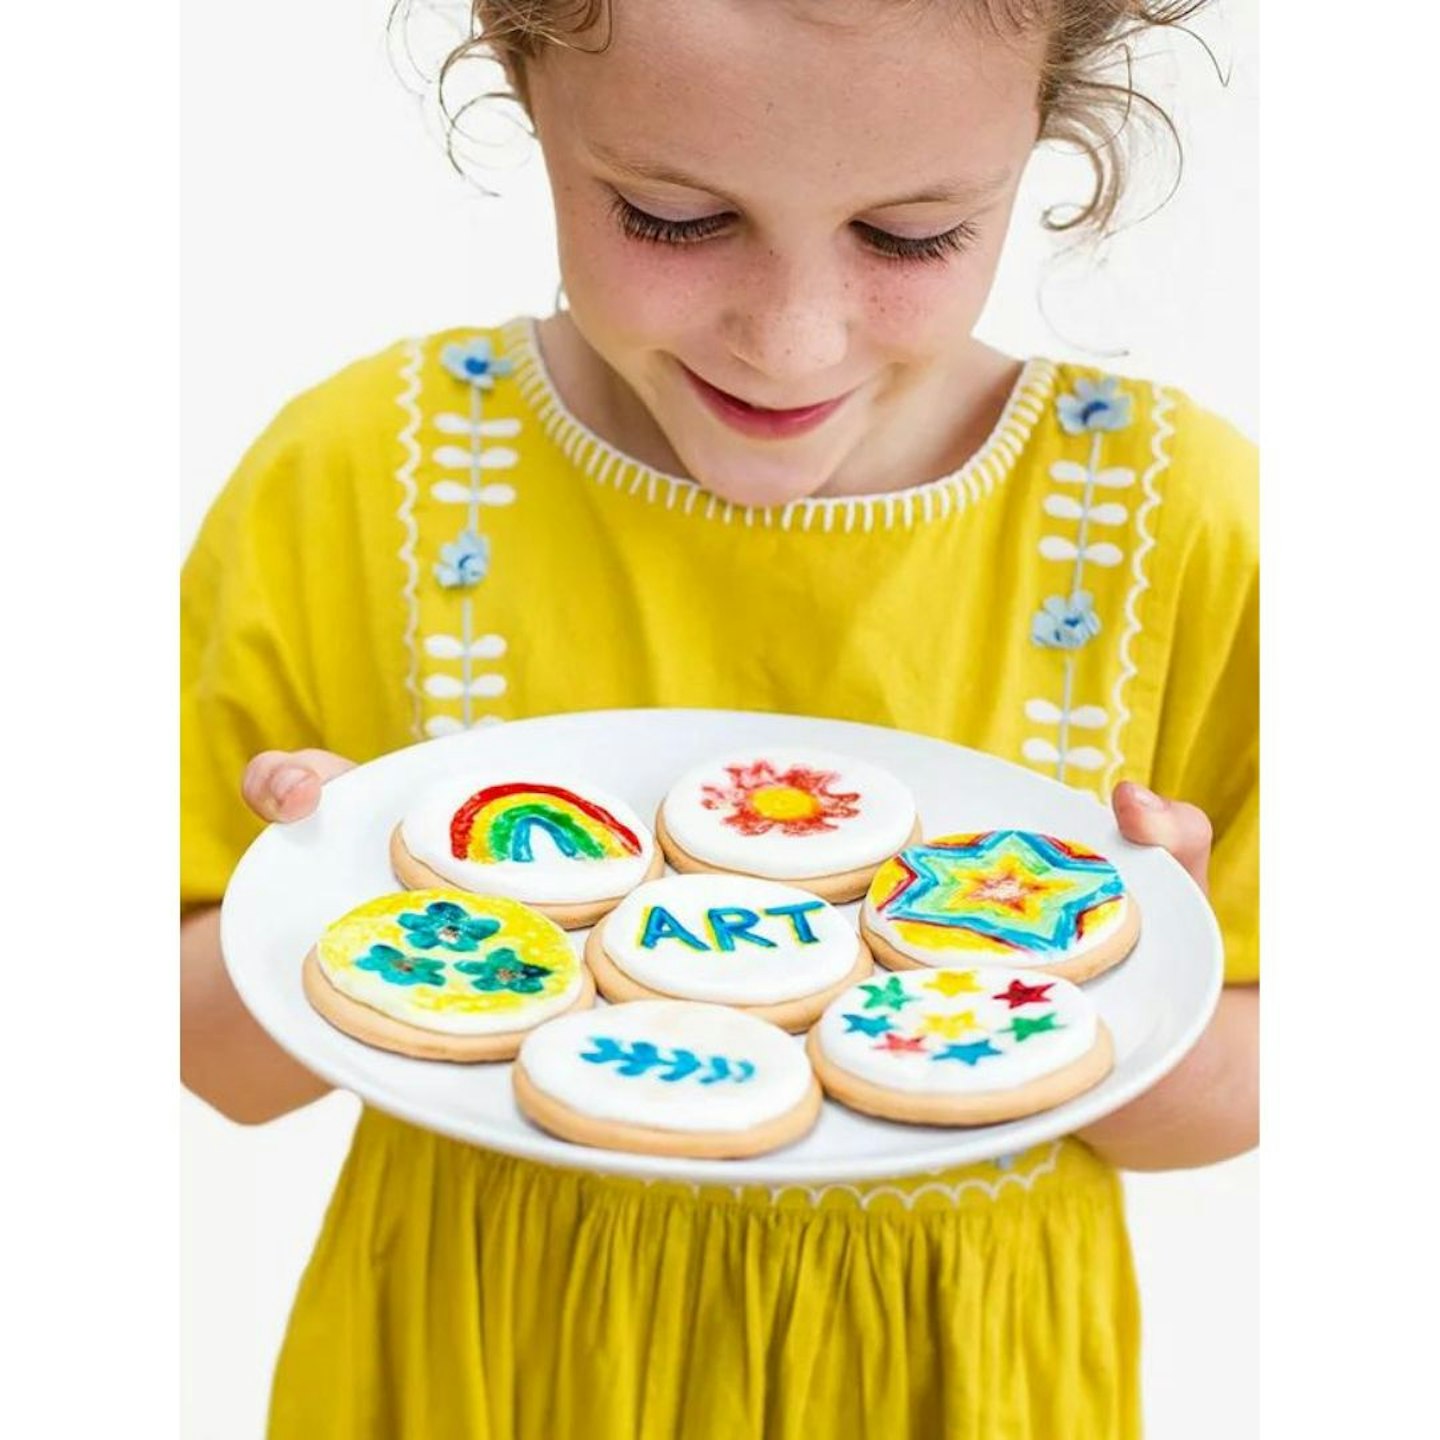 The best cookie decorating kits: Craft & Crumb Watercolour Biscuit Set